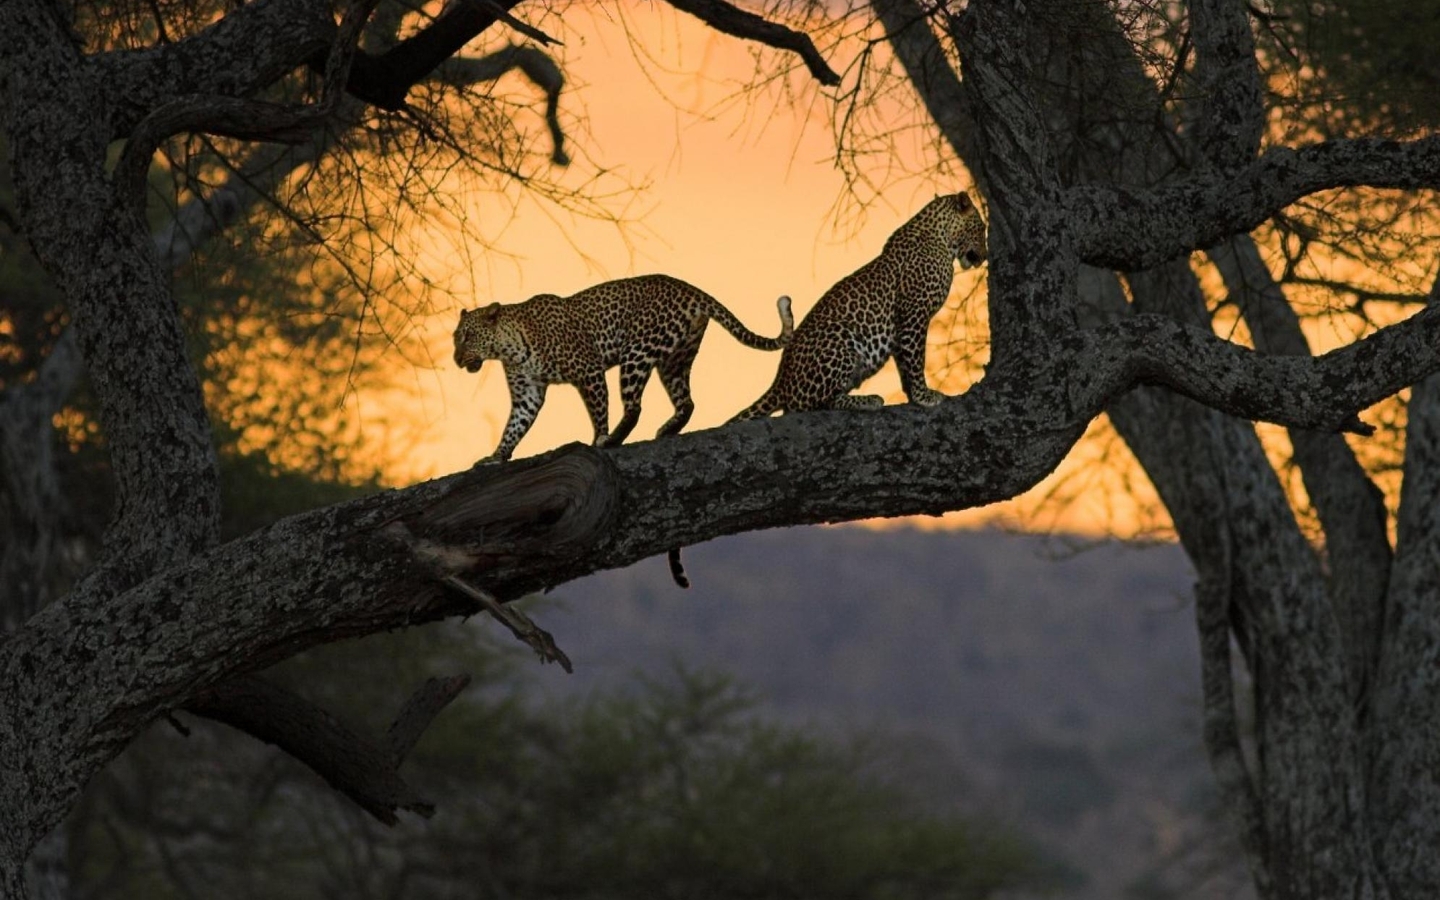 Image: Tree, Africa, leopard, cats, nature, sunset